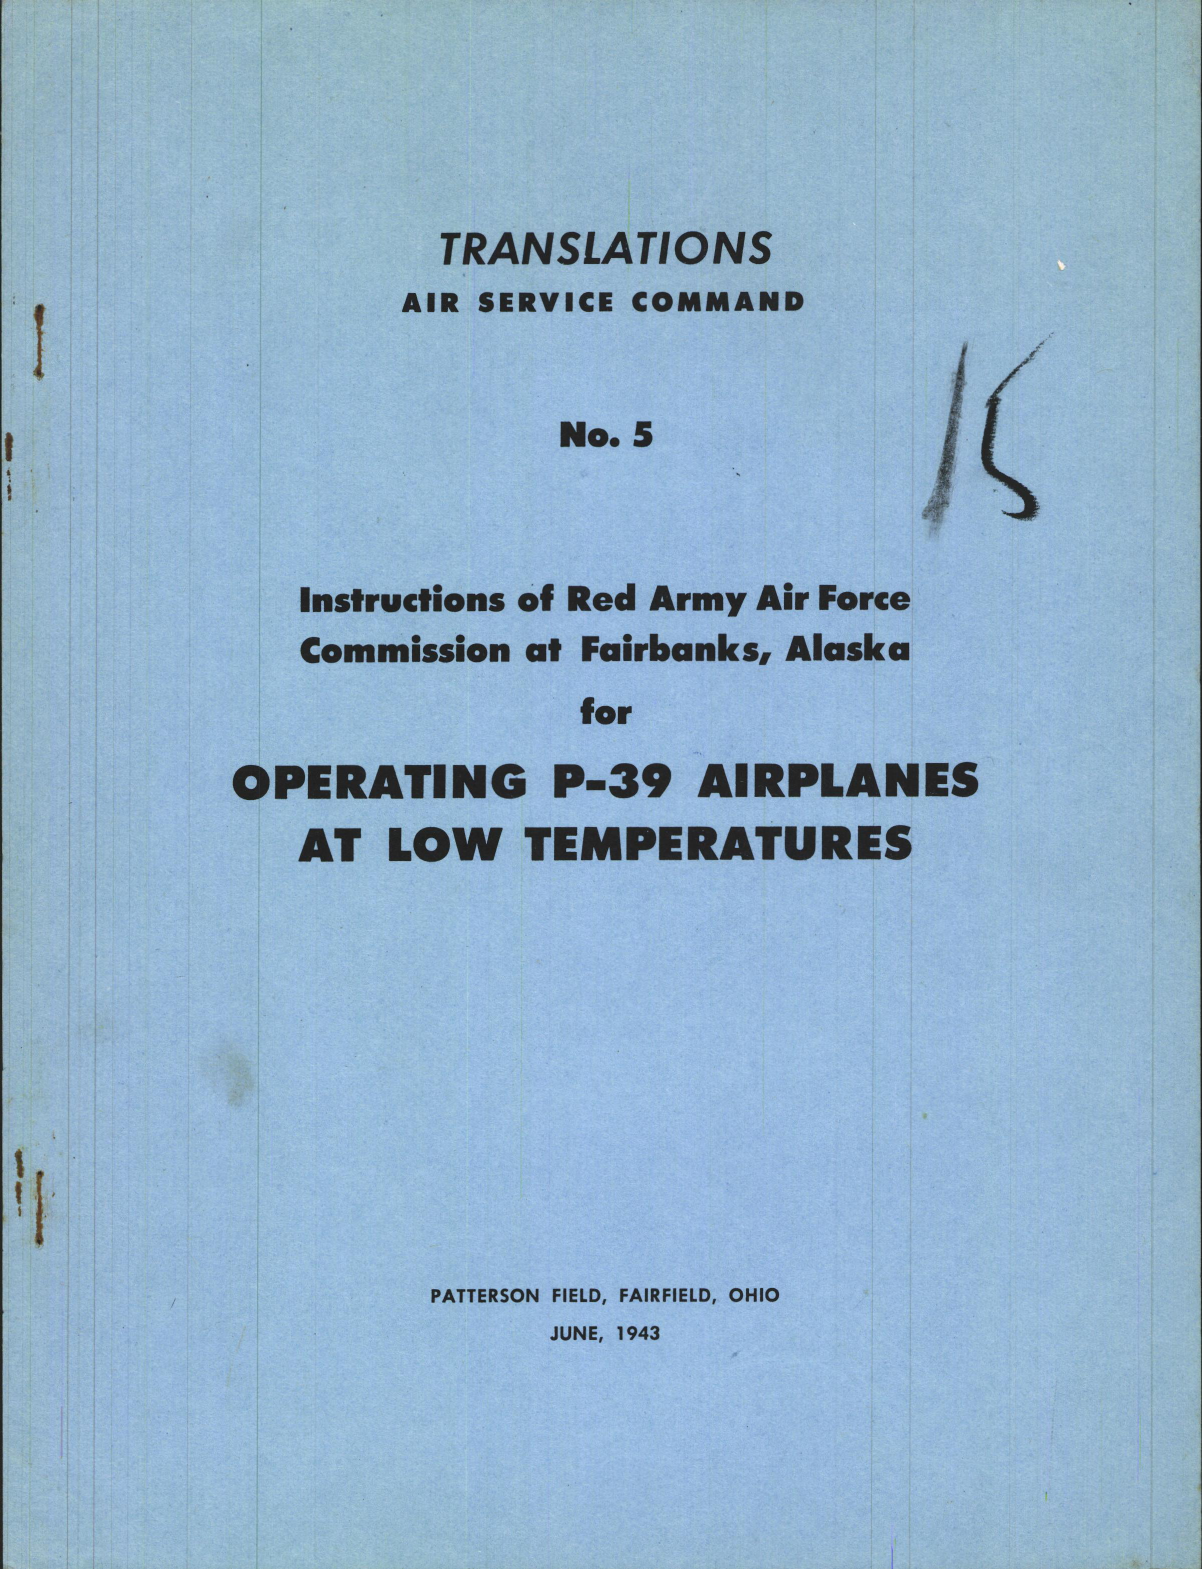 Sample page 1 from AirCorps Library document: Instructions of Red Army Air Force at Fairbanks, Alaska for Operating P-39 Airplanes at Low Temperatures